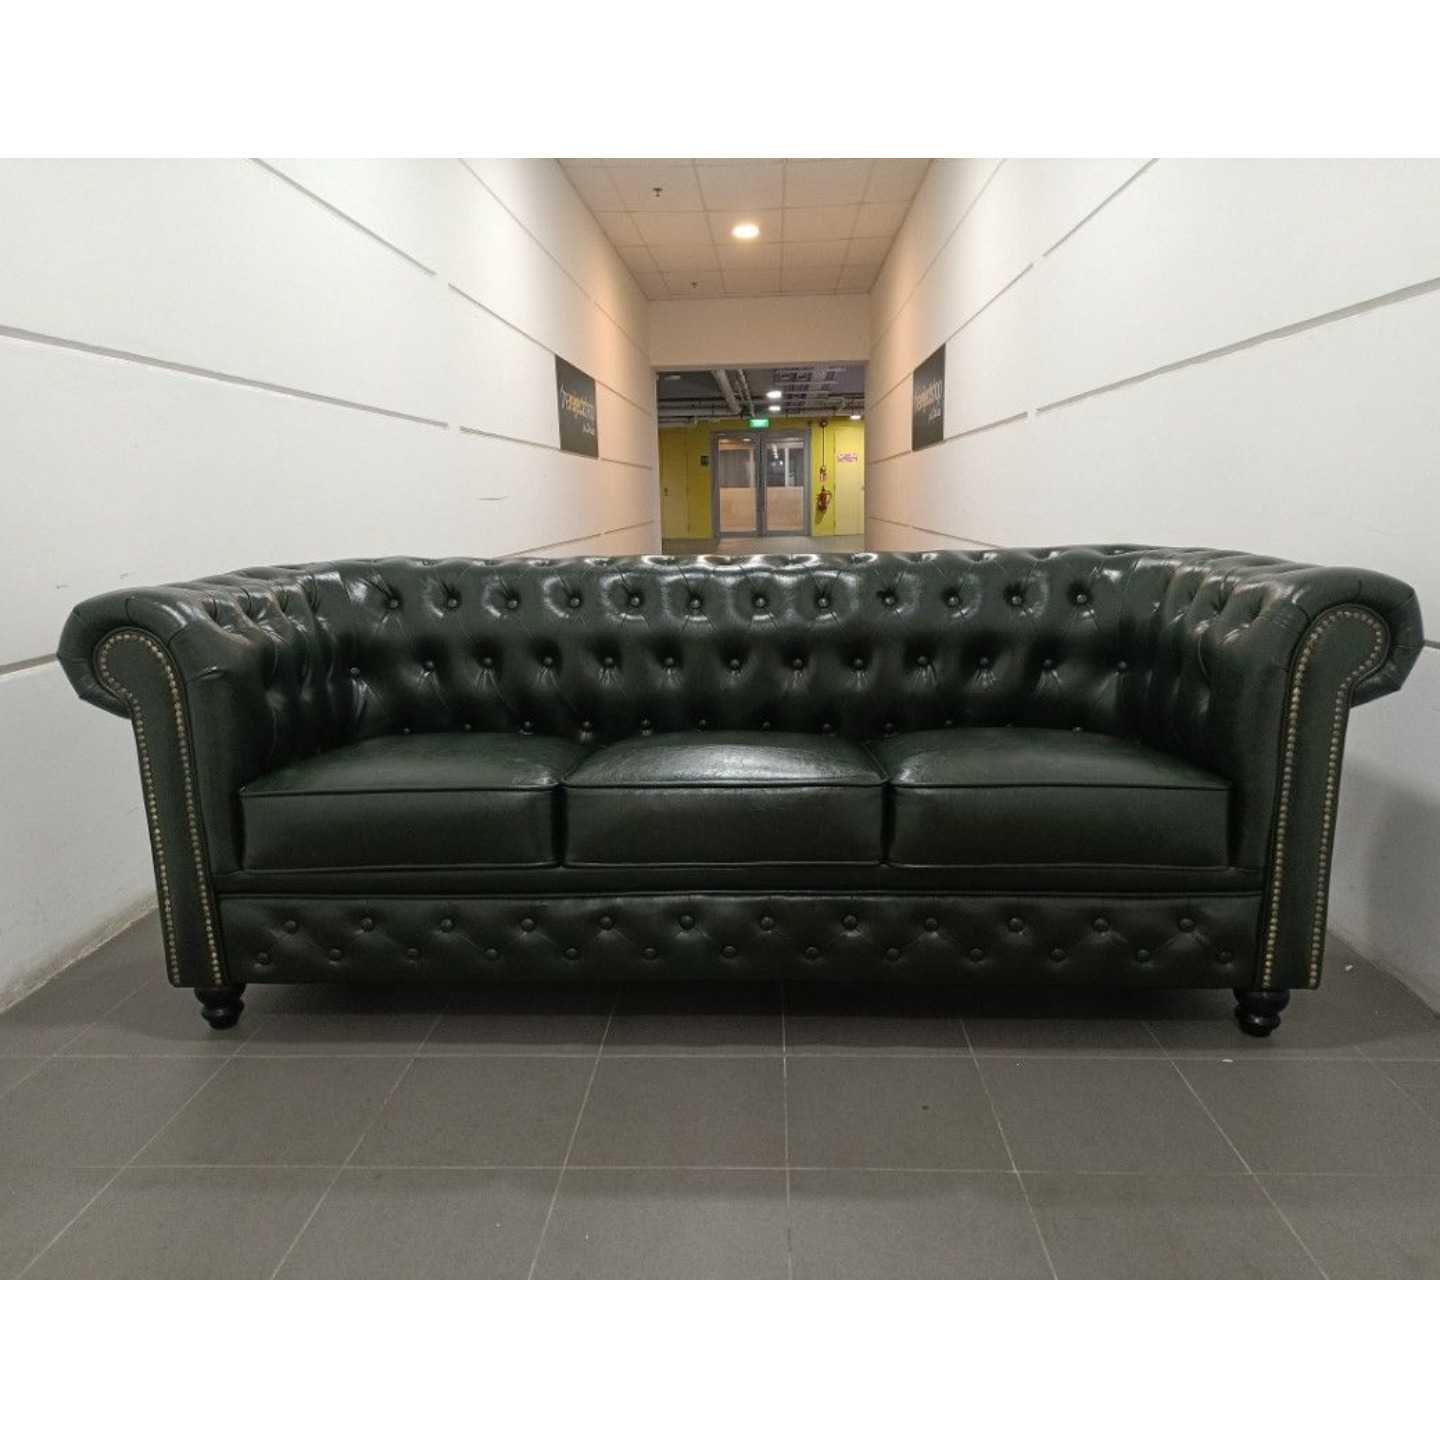 PRE ORDER SALVADORE X 3 Seater Chesterfield Sofa in EMERALD GREEN PU - Estimated Delivery by End of May 2023